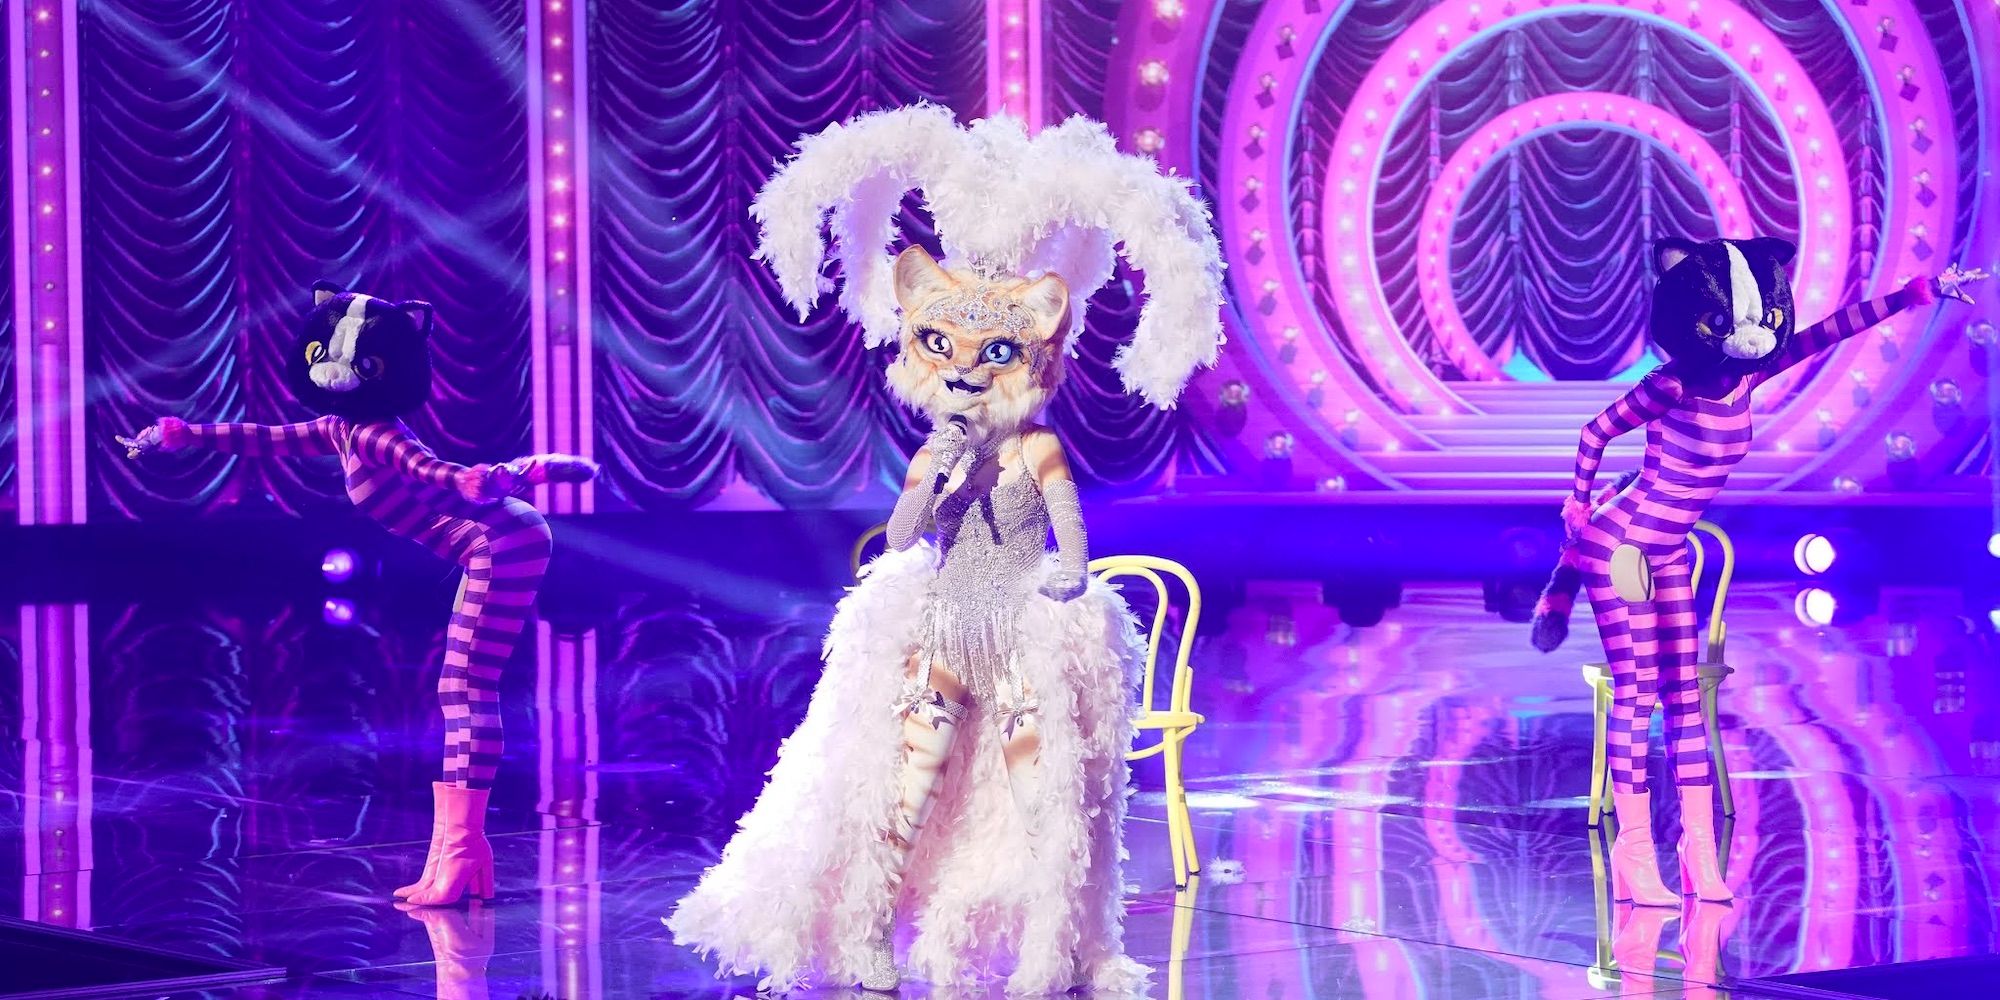 The Masked Singer The 10 Most Unfair Eliminations According to Reddit